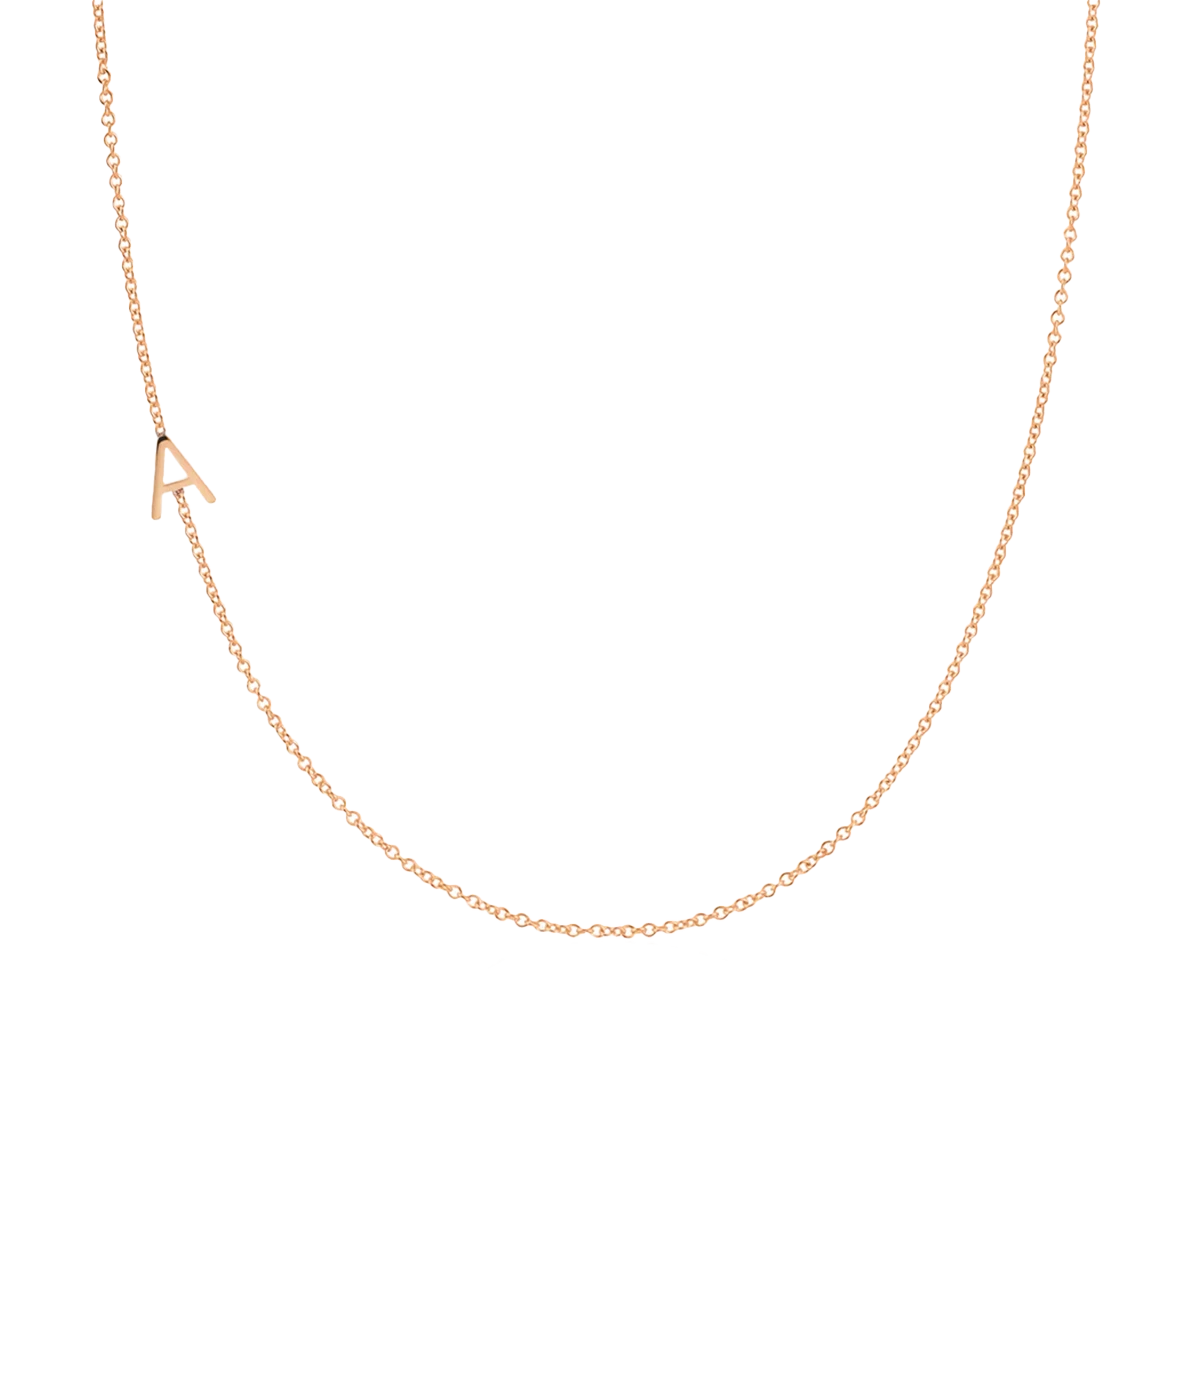 Initial Necklace in Rose Gold